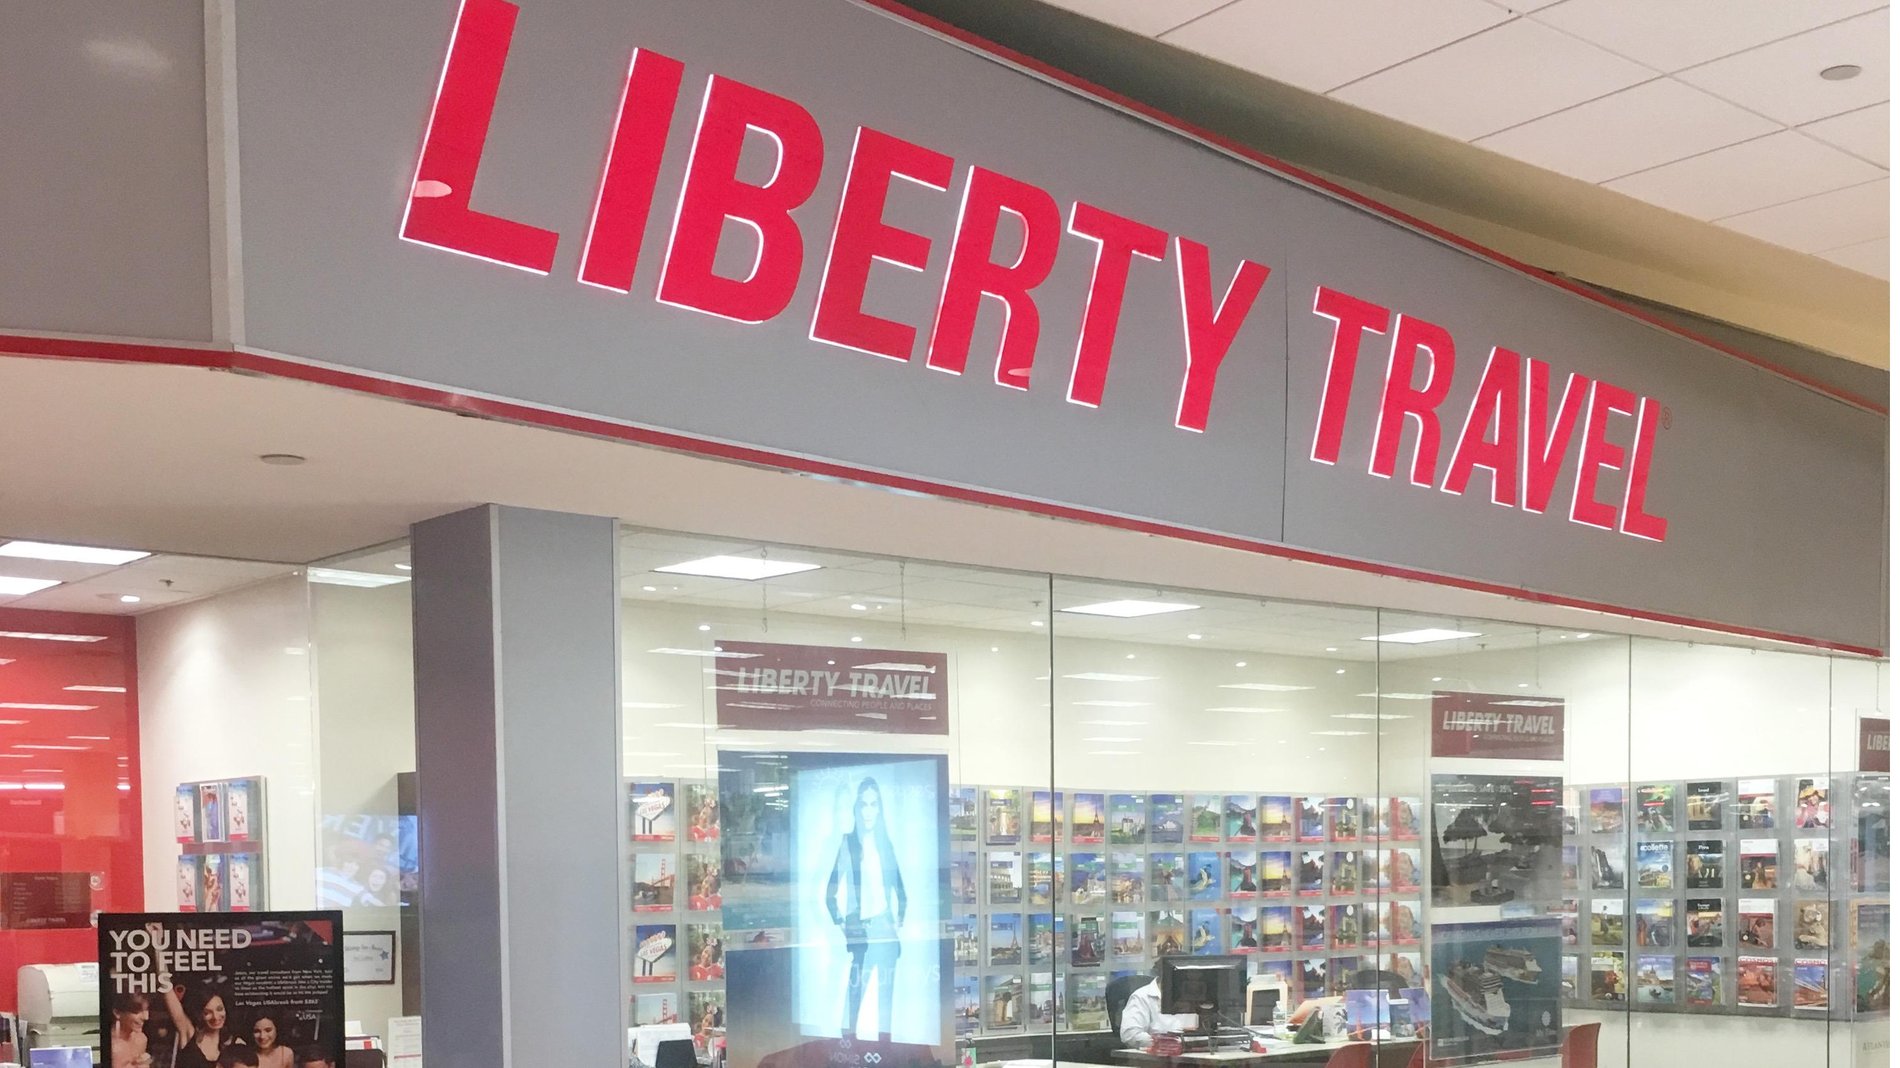 liberty travel offices near me